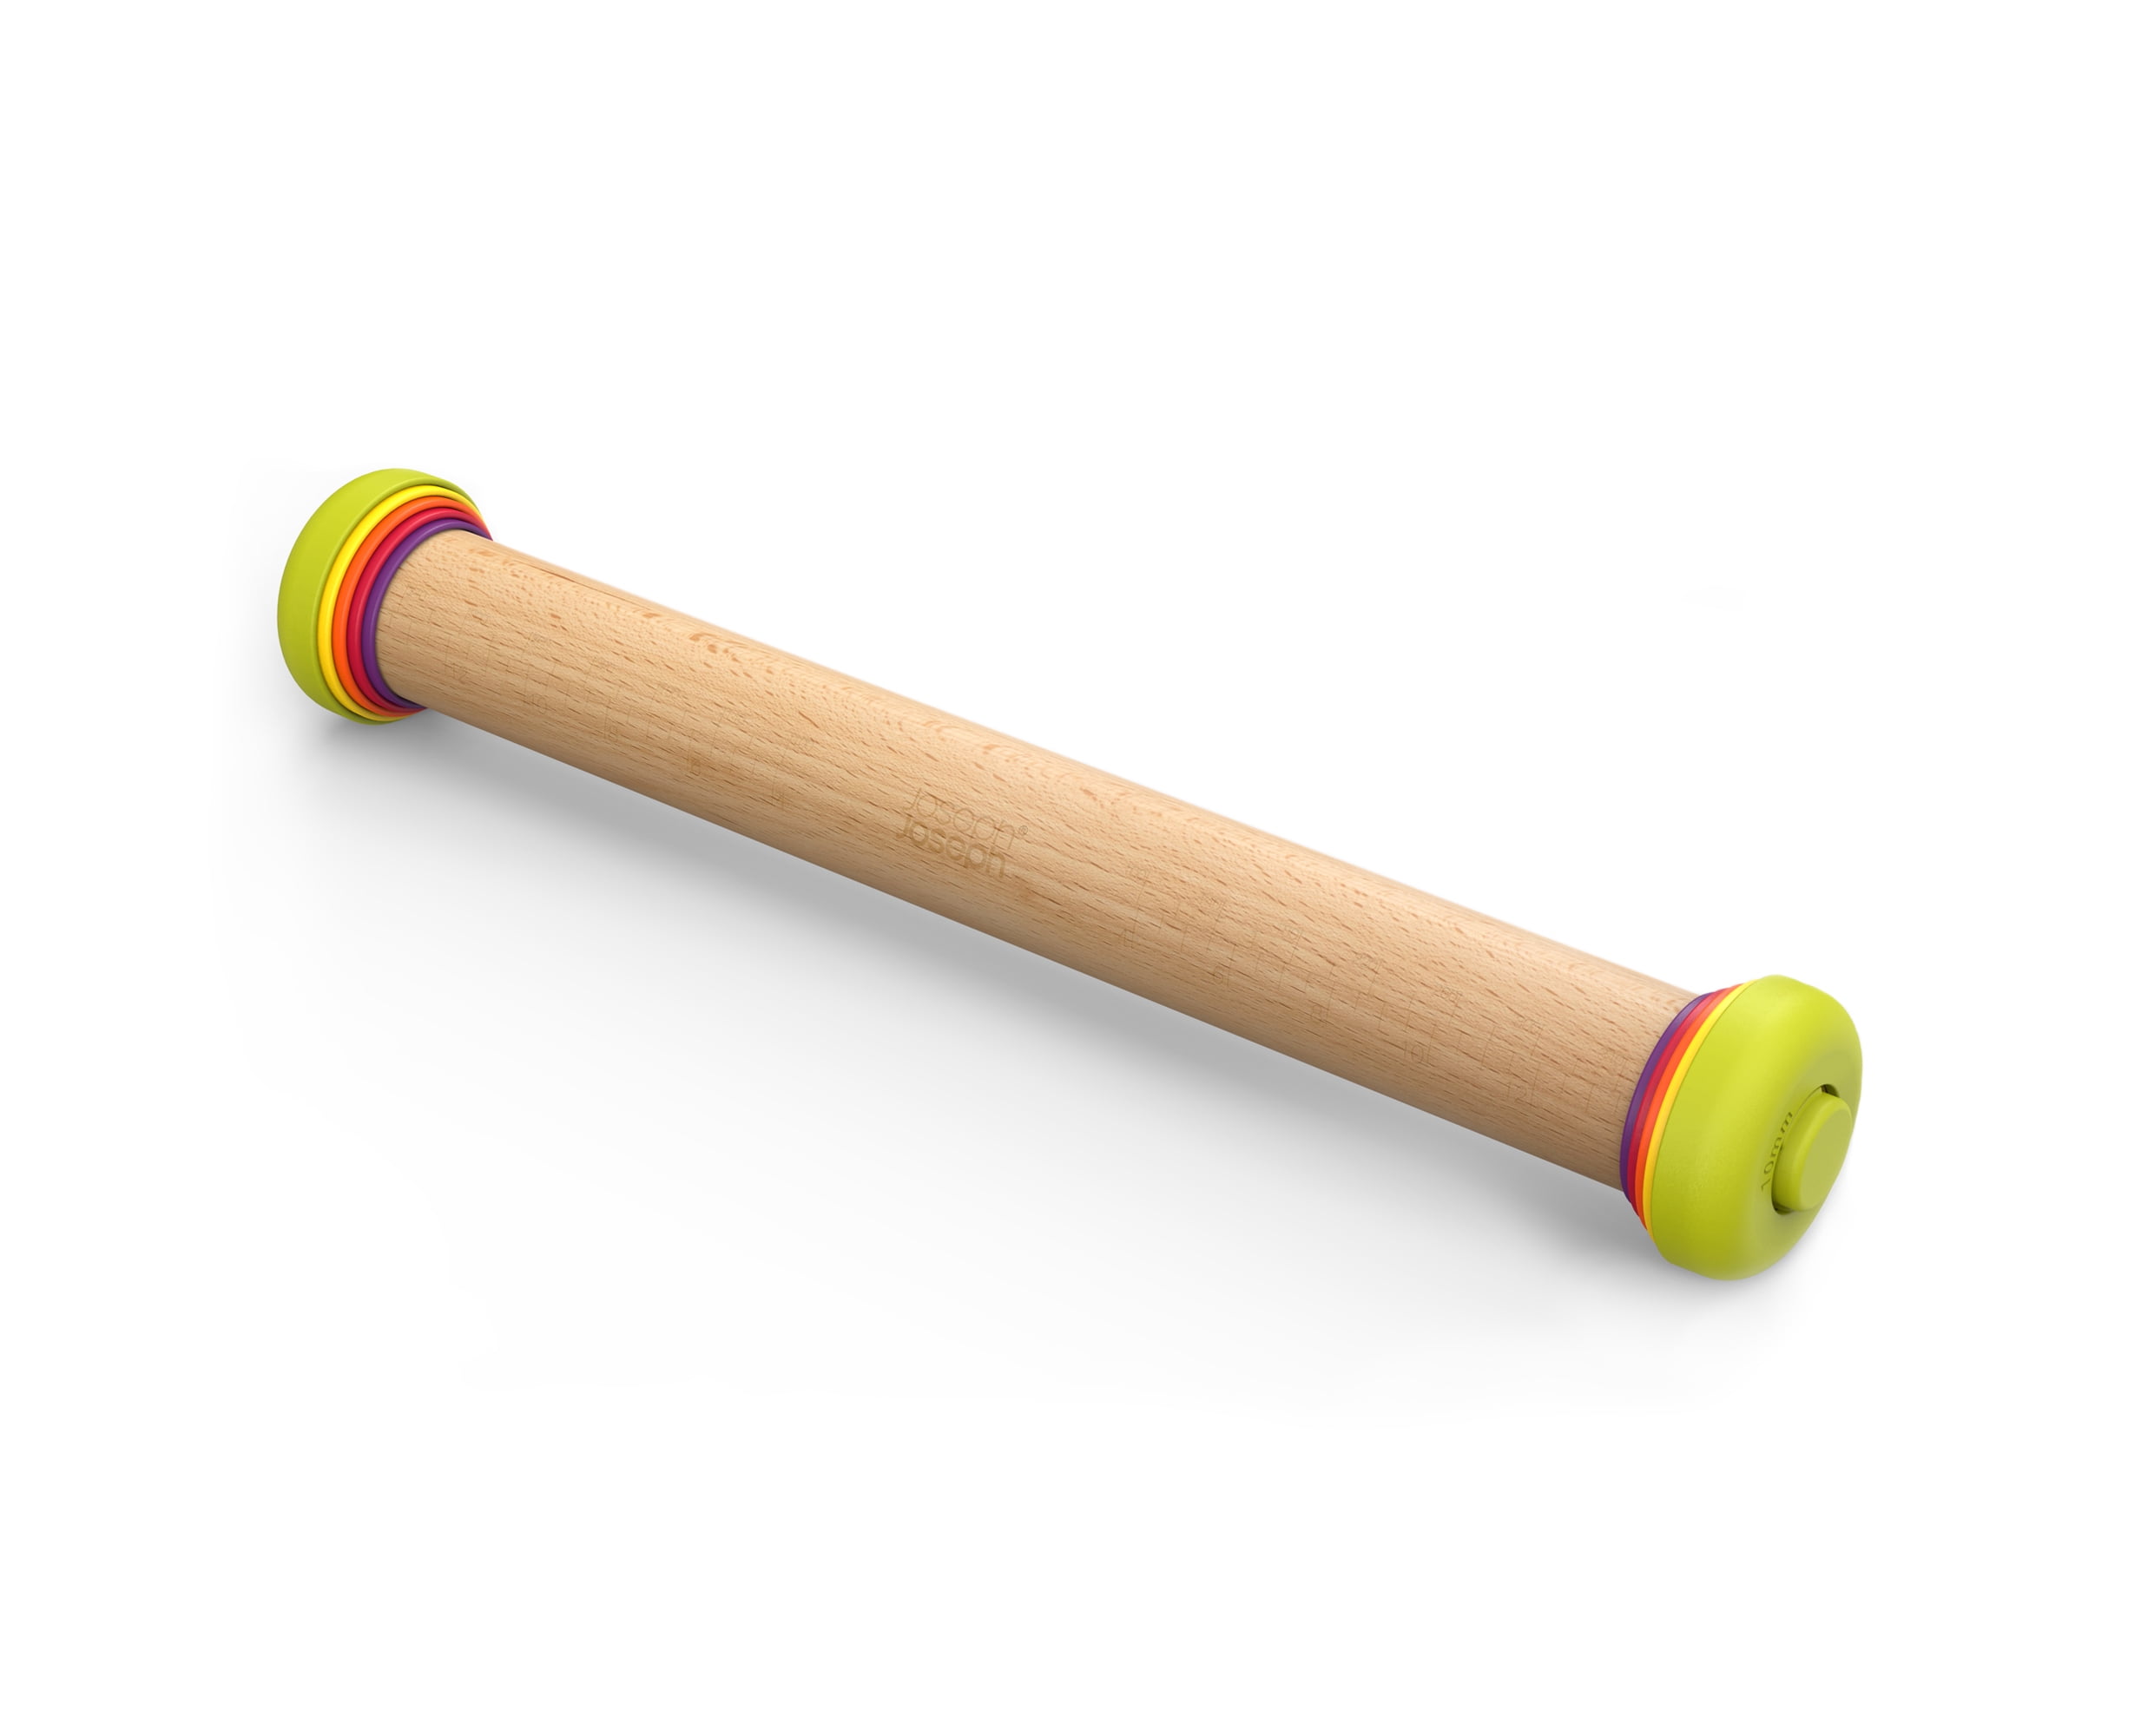 Joseph Joseph PrecisionPin Baking Adjustable Rolling Pin - Consistent and  Even Dough Thickness for Perfect Baking Results